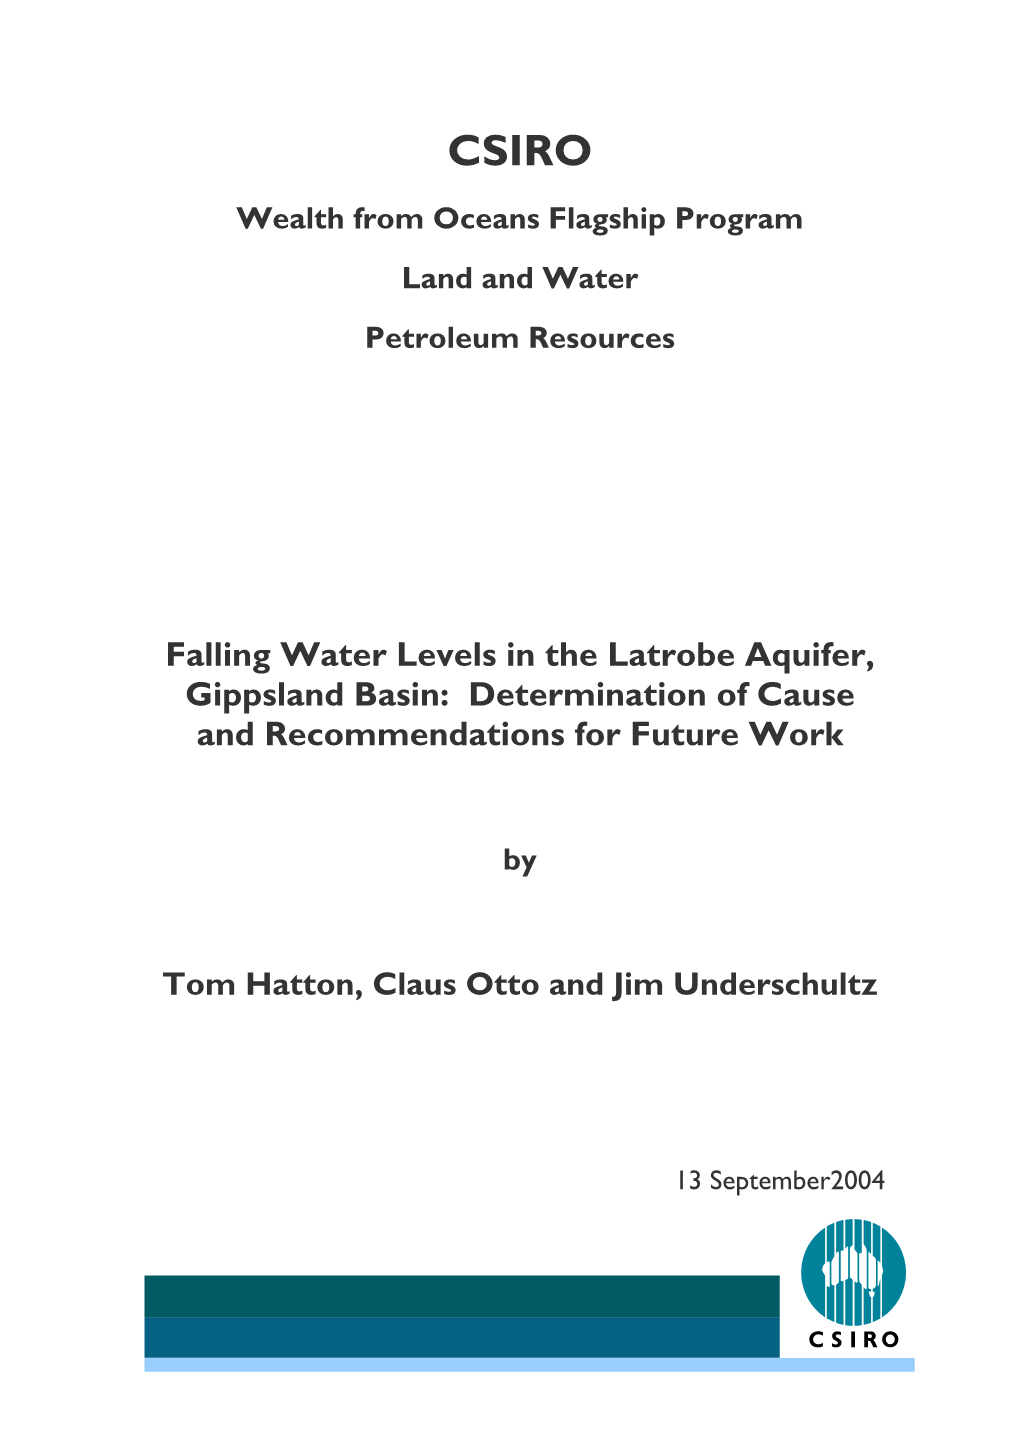 Falling Water Levels in the Latrobe Aquifer, Gippsland Basin: Determination of Cause and Recommendations for Future Work